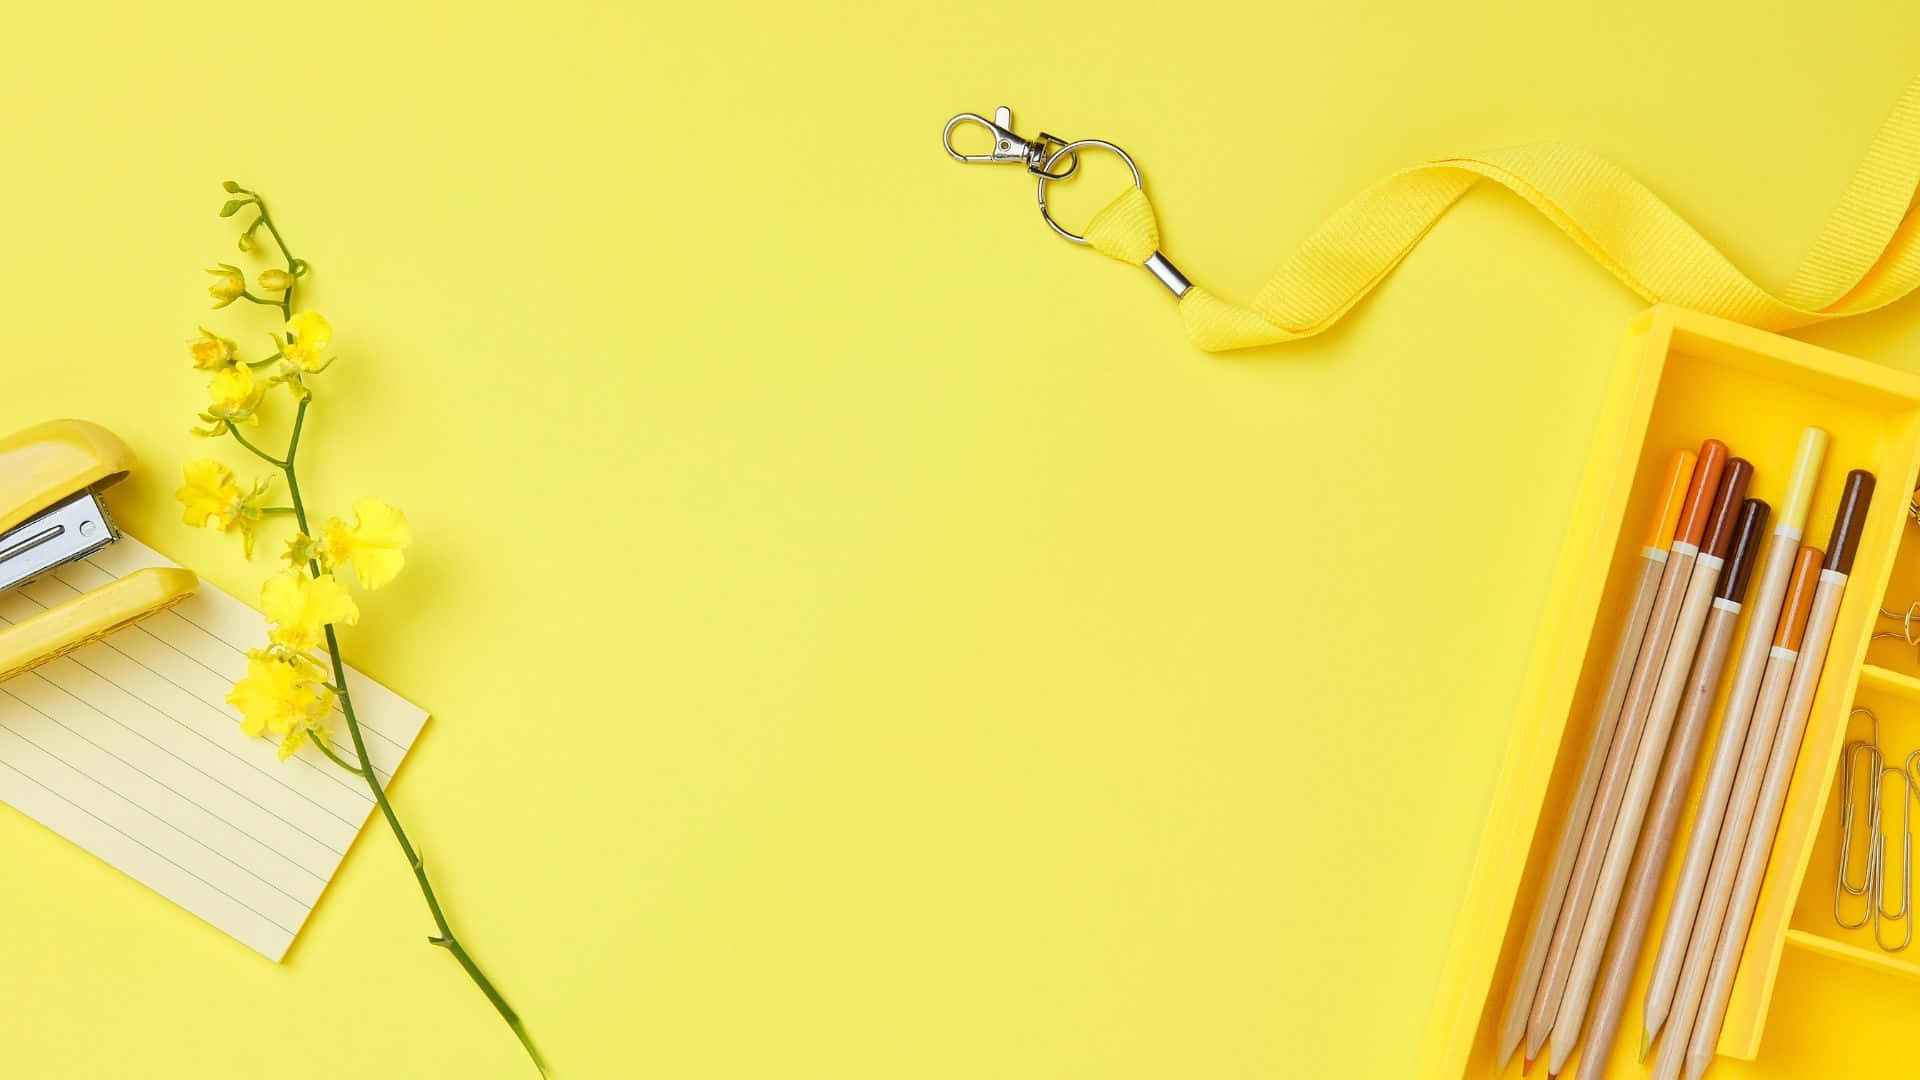 Brighten your day with this yellow aesthetic background